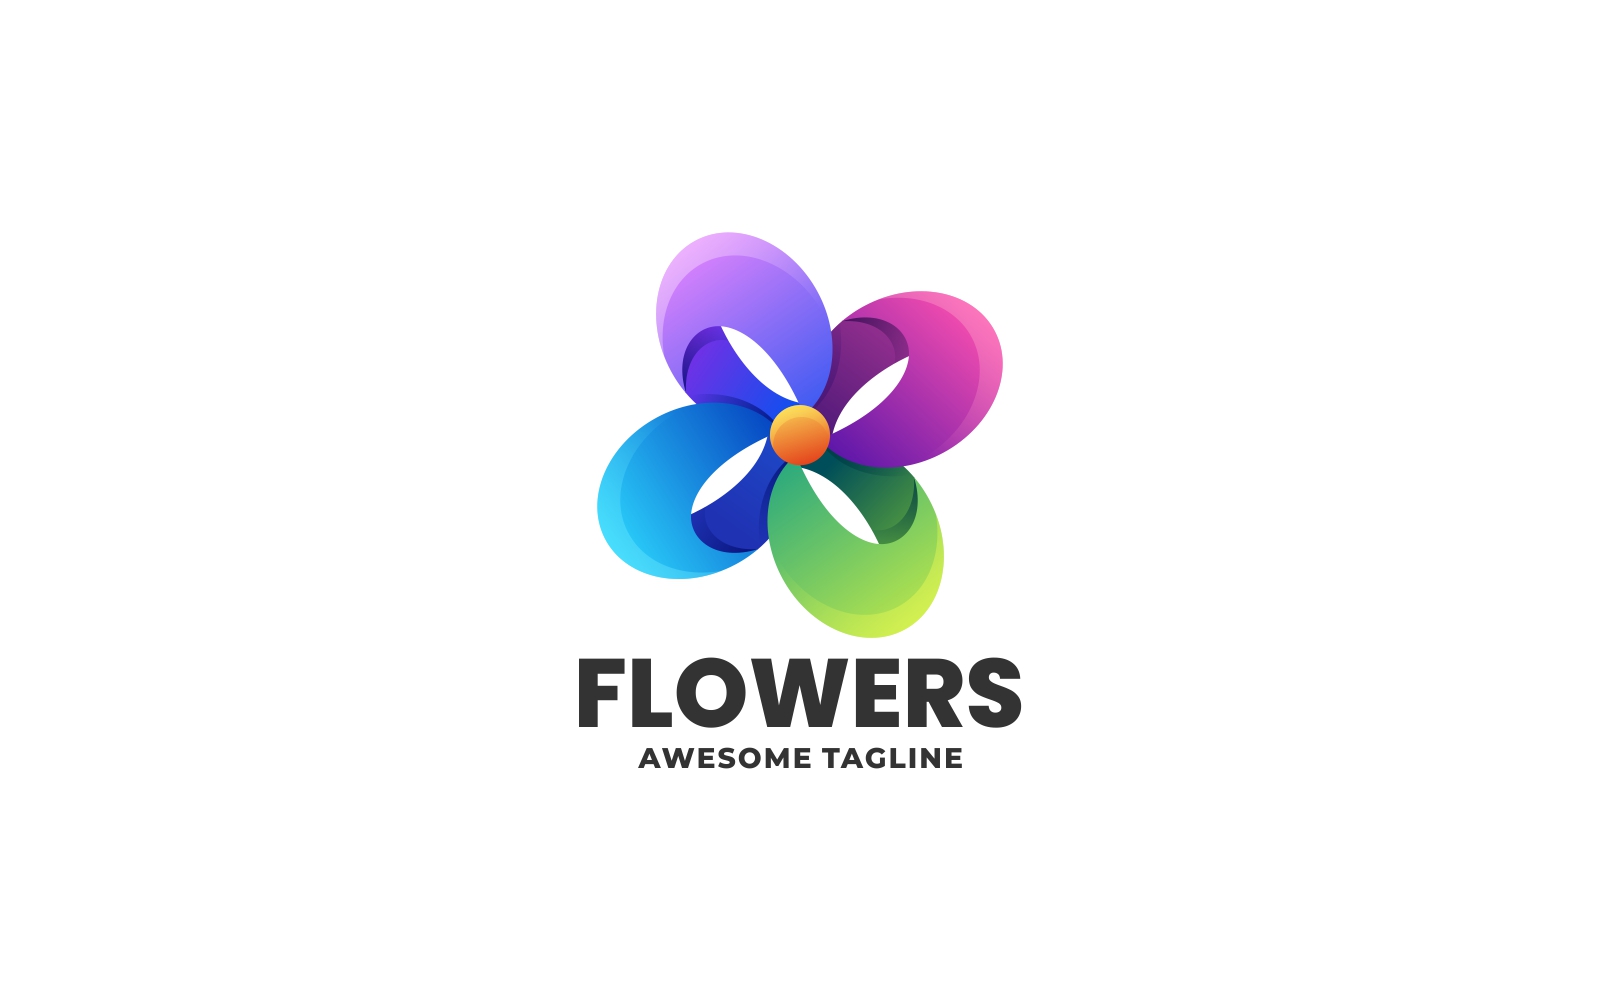 Flowers Gradient Colorful Logo Style